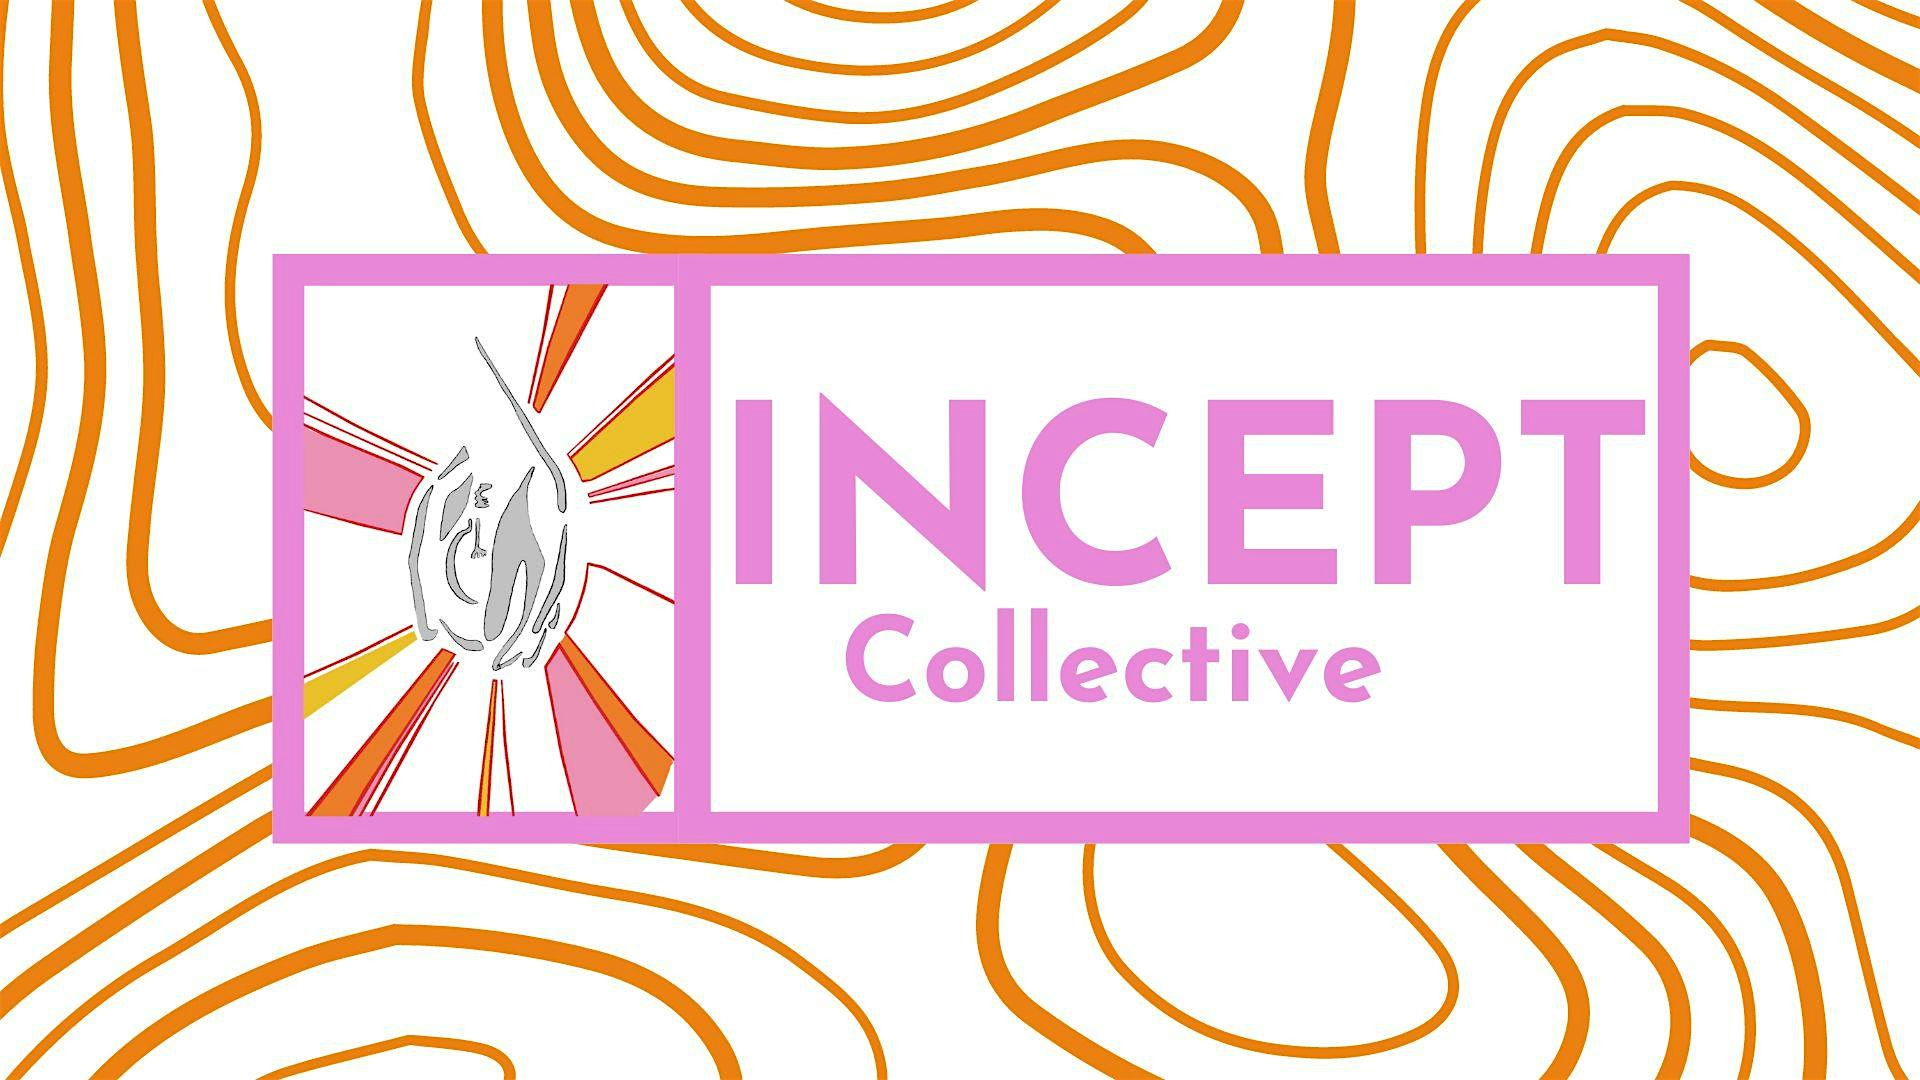 INCEPT COLLECTIVE